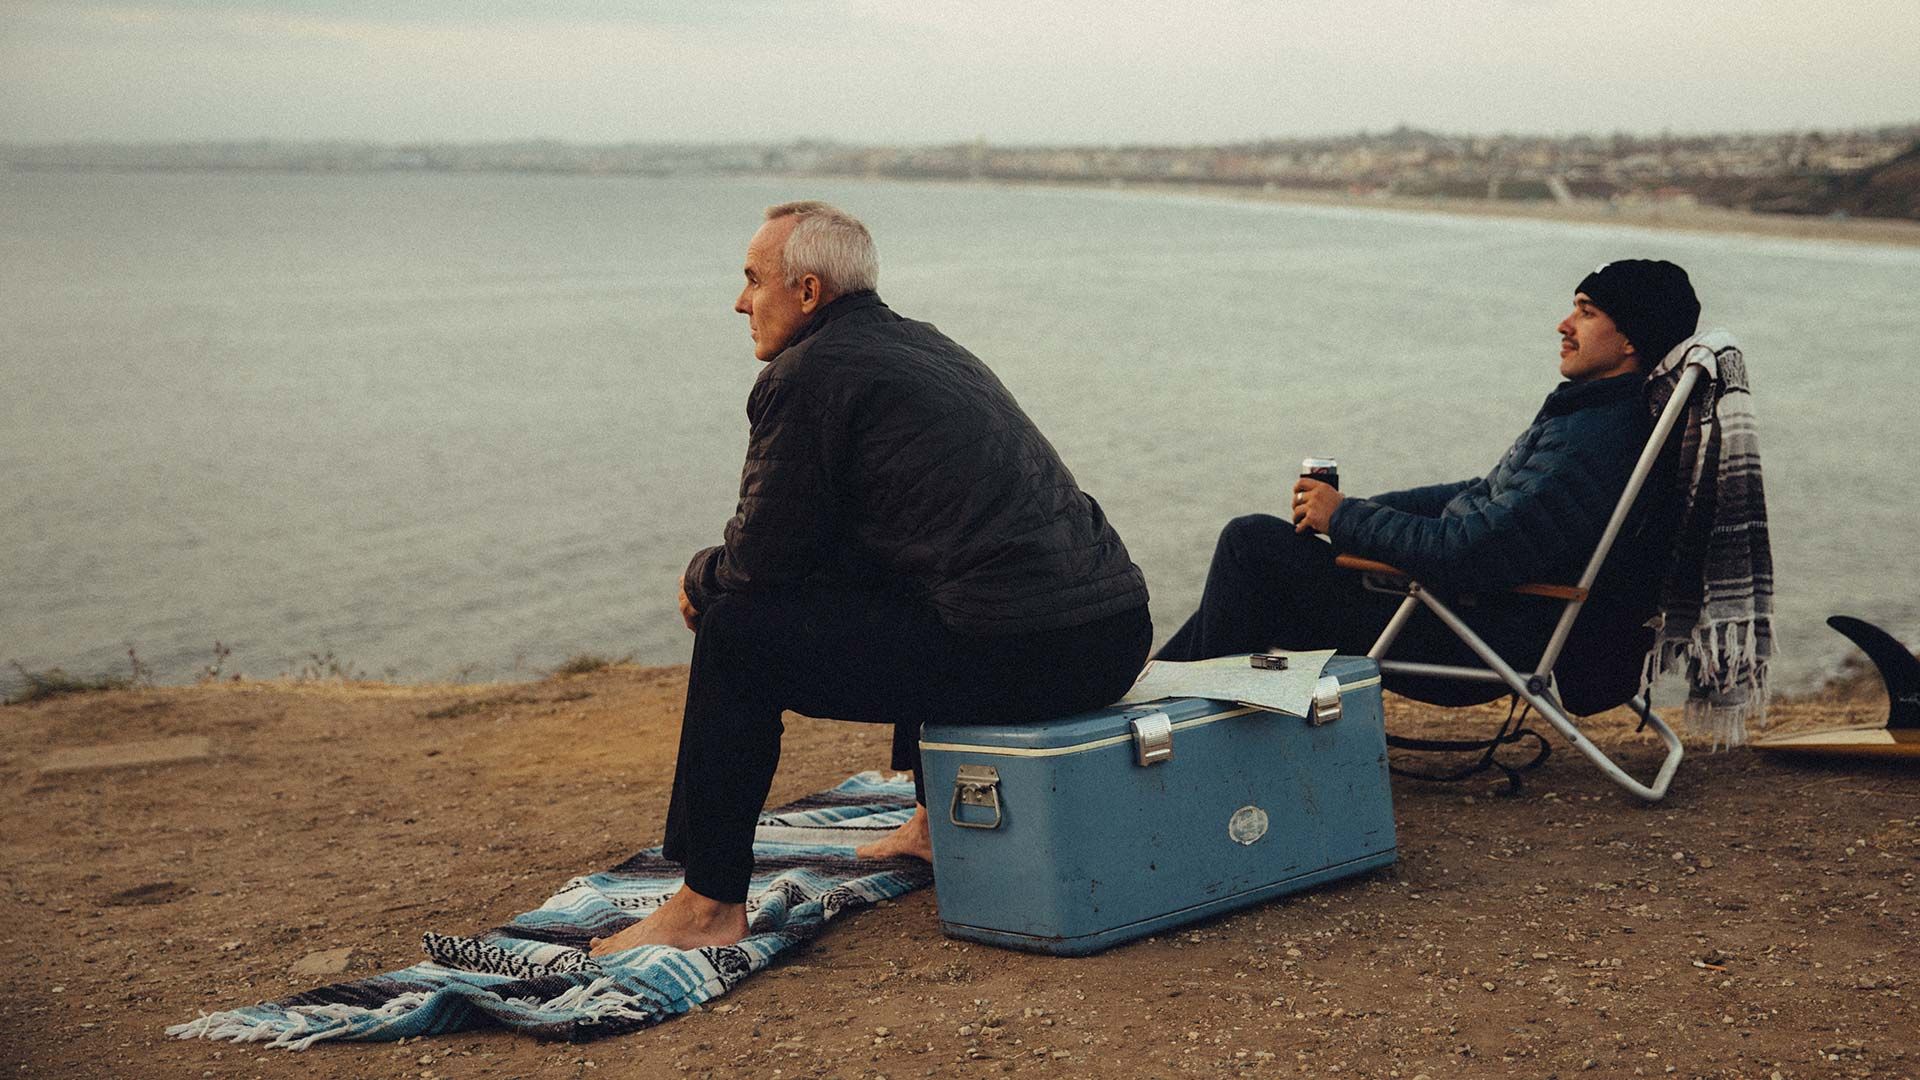 A father and son sitting down overlooking the beach